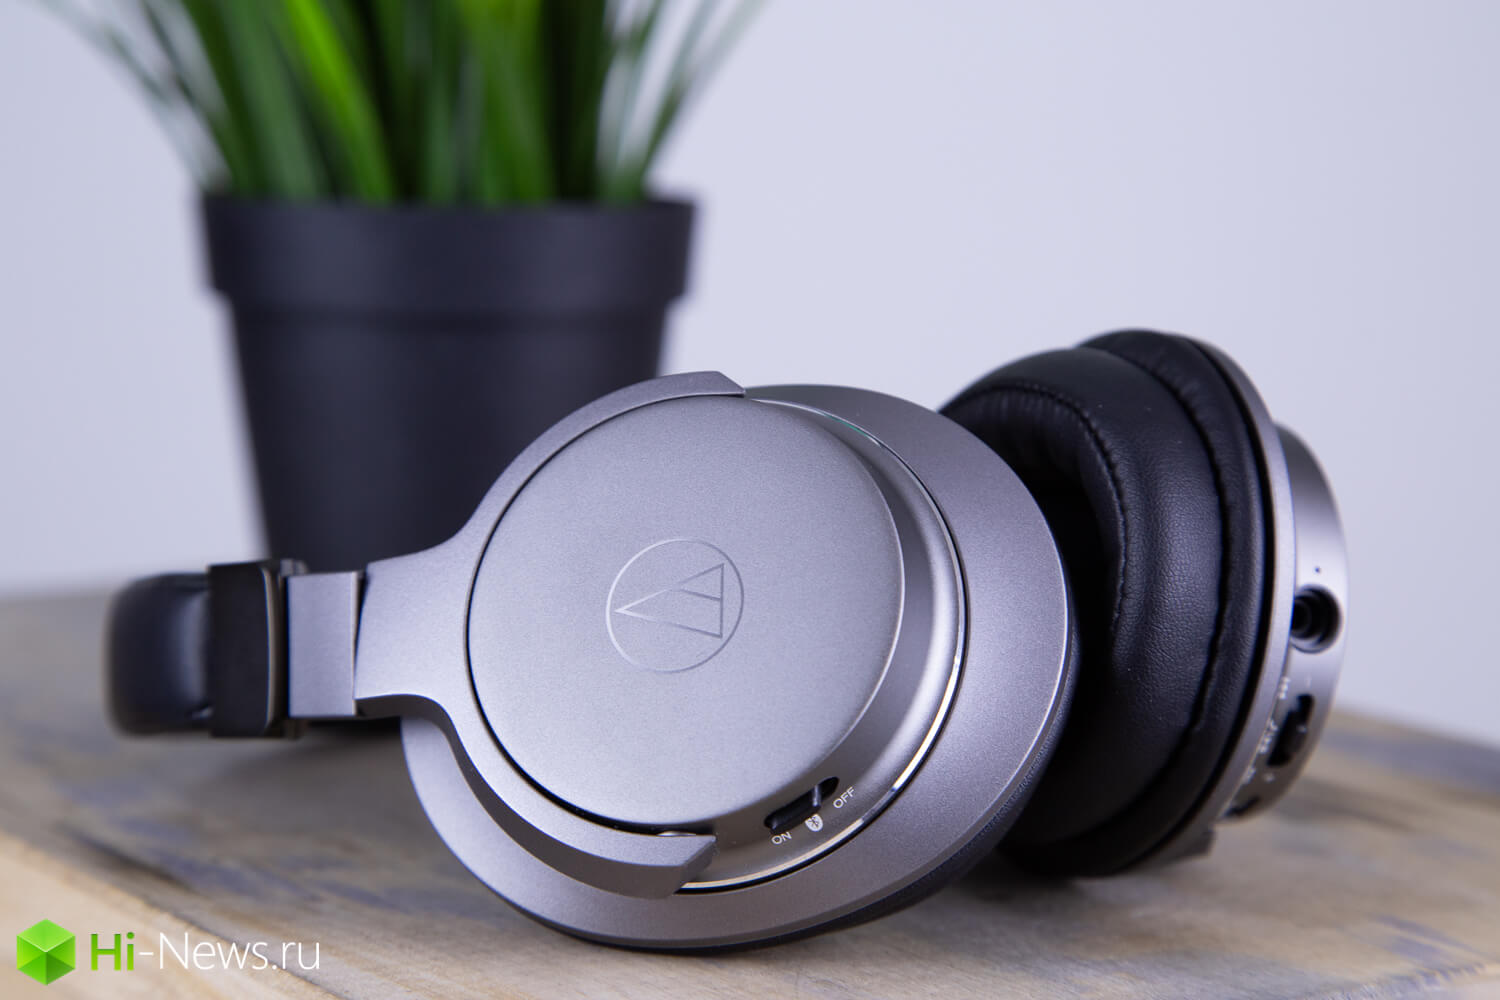 Review Audio-Technica ATH-AR5BT: when wires needed